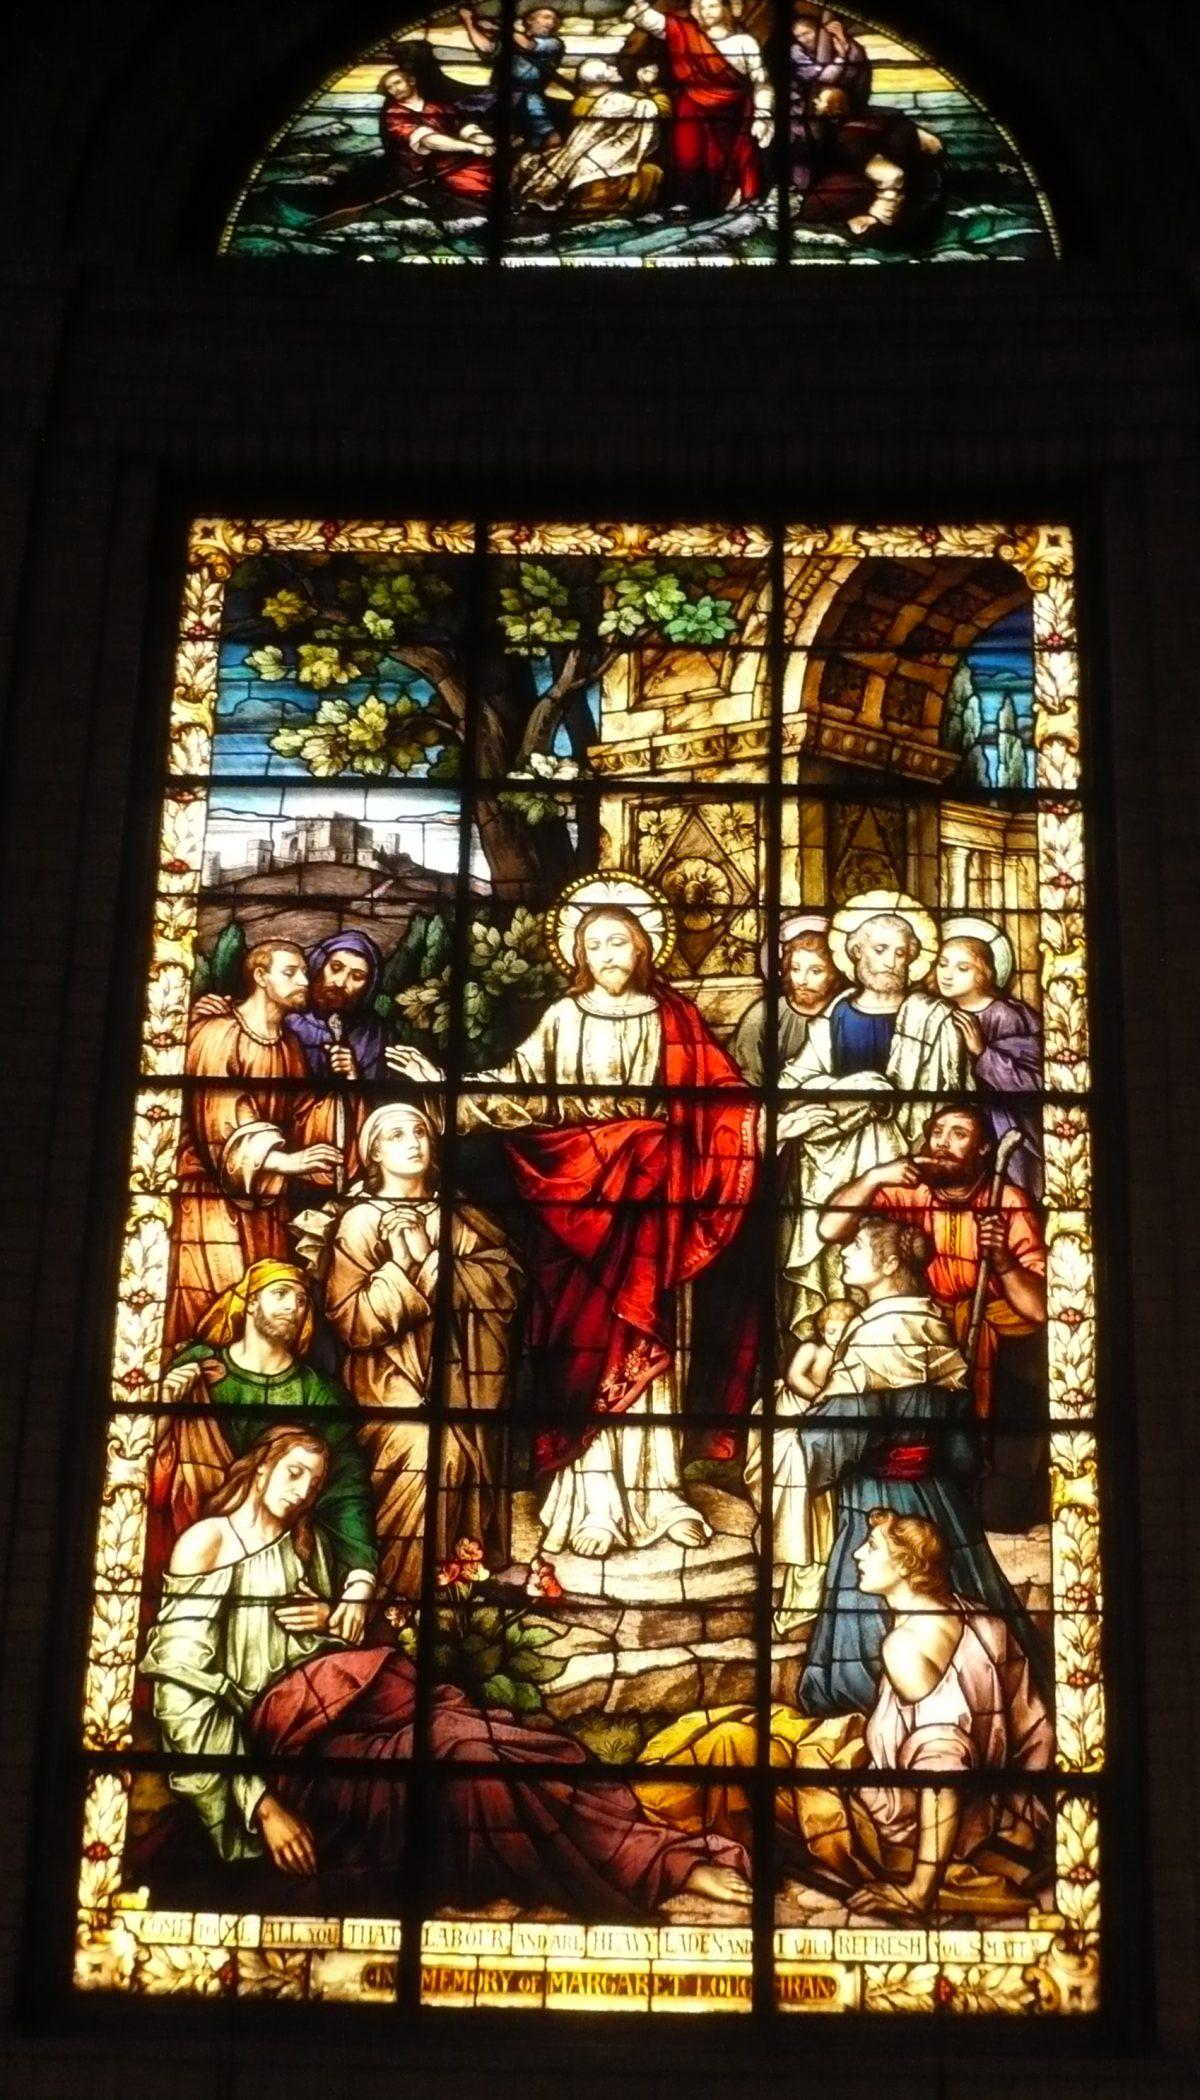 A stained glass window of Jesus healing the afflicted in the Basilica of St. Lawrence. (CC BY-SA 3.0)